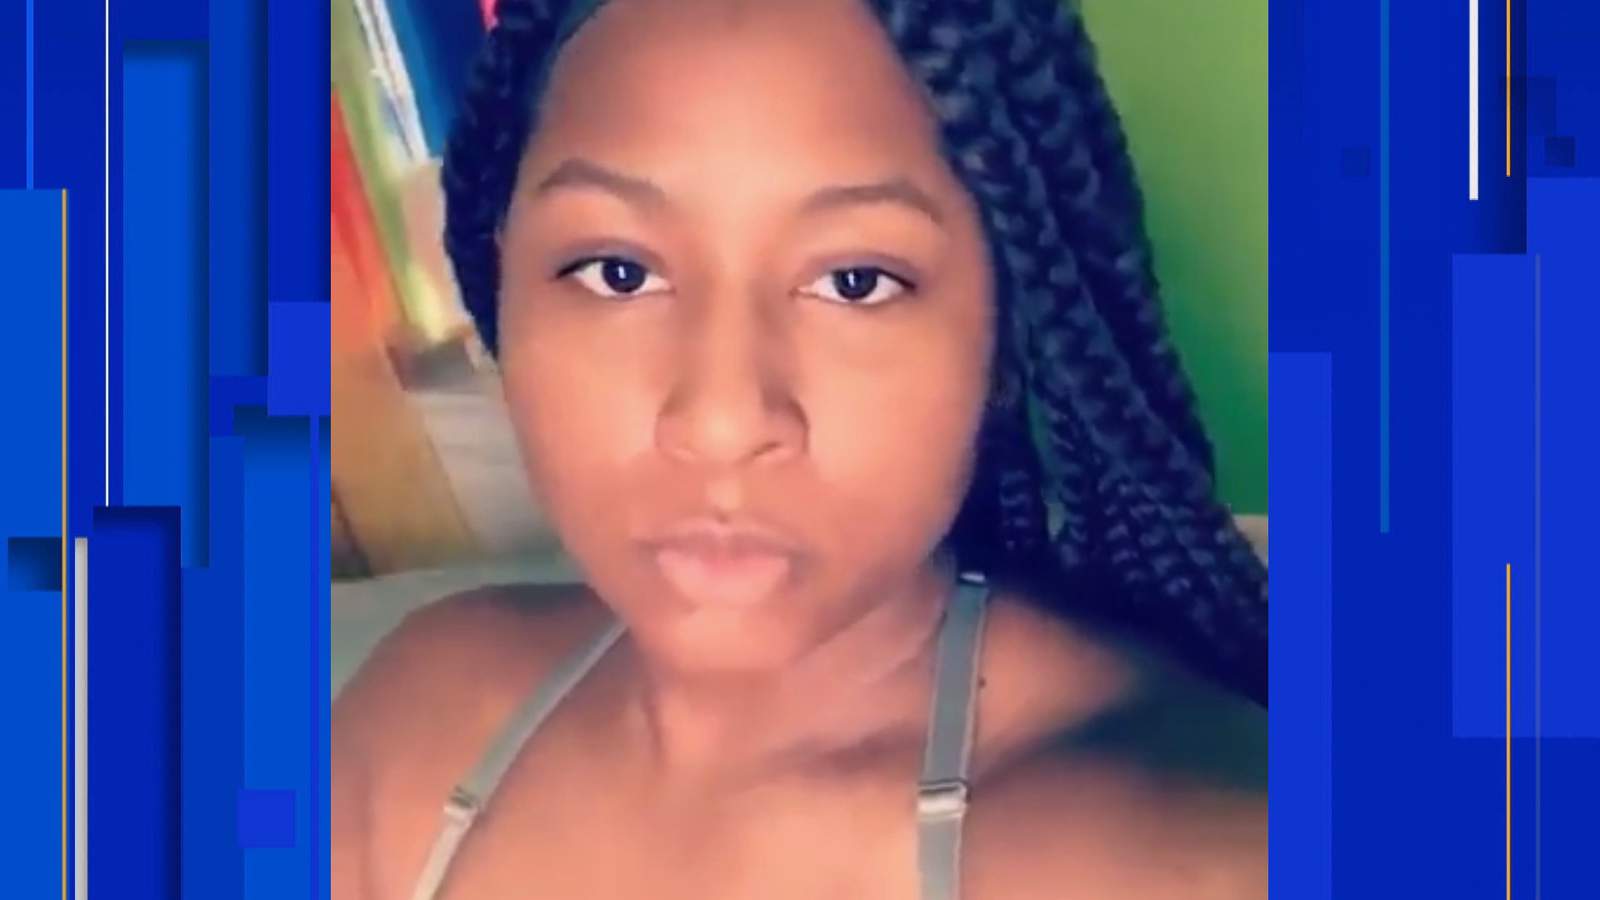 Detroit police want help finding a missing 16-year-old girl